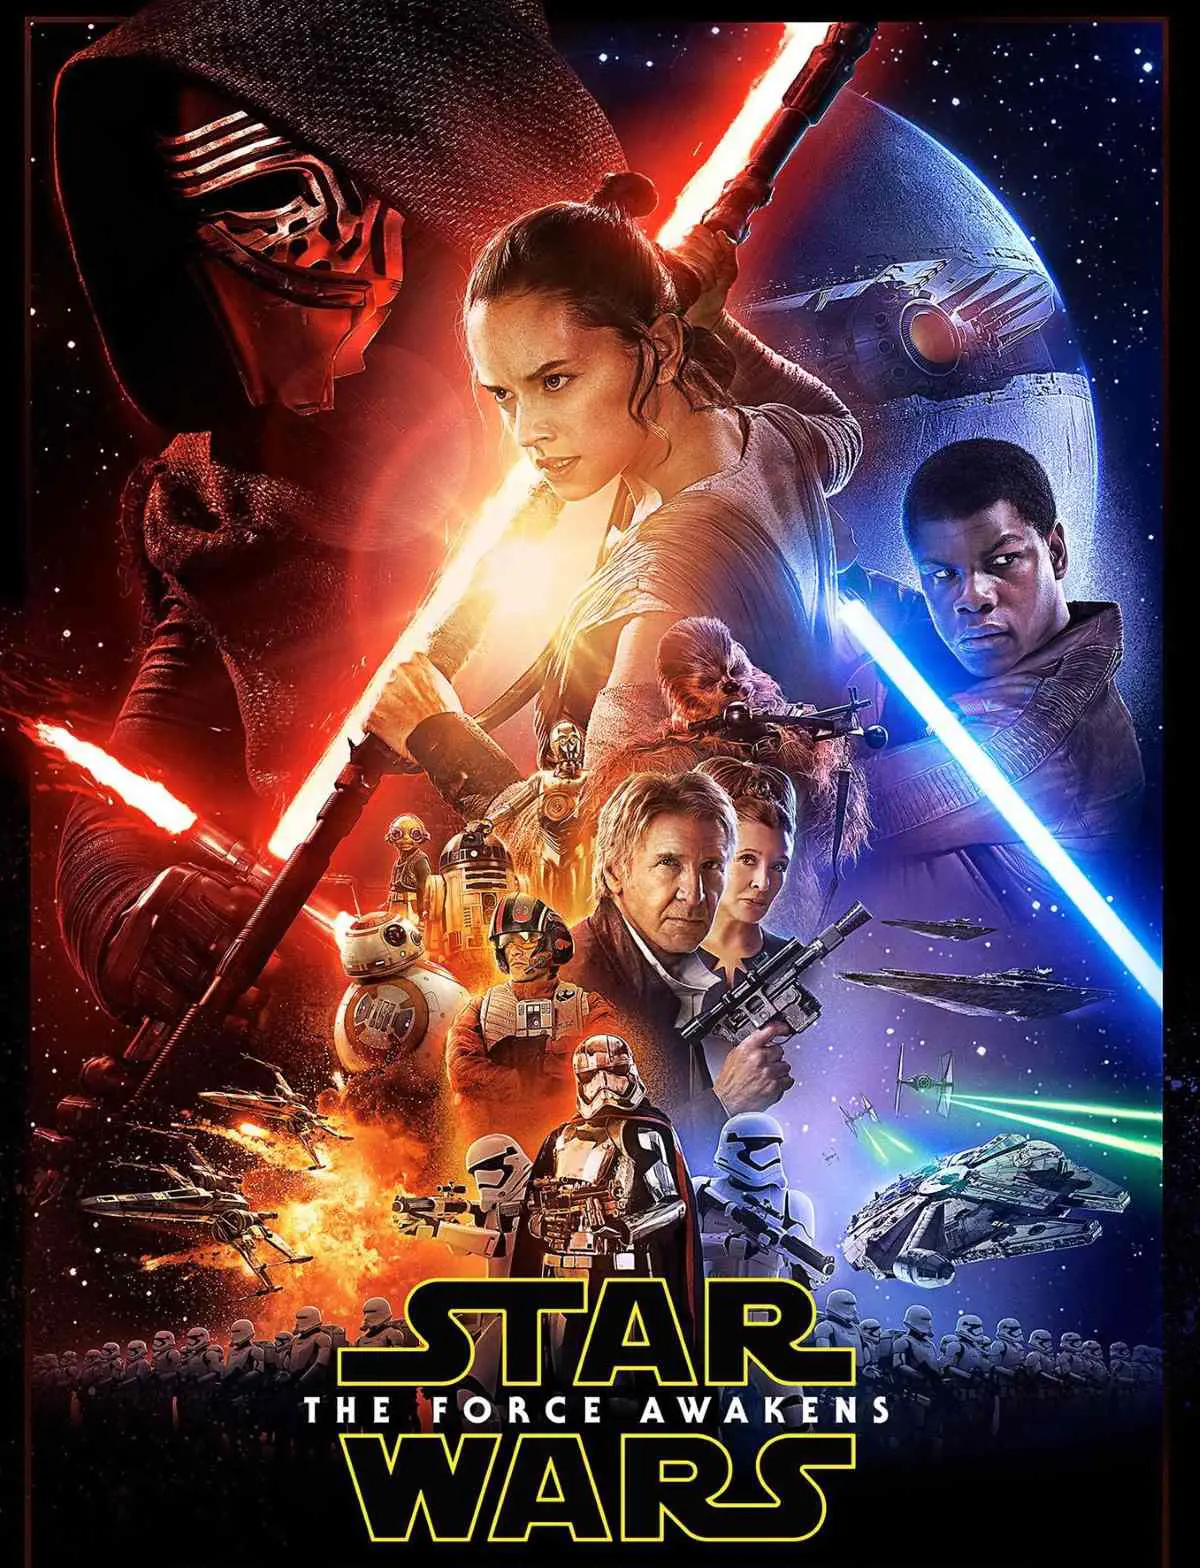 Episode VII - The Force Awakens is a sequel to Return of the Jedi (1983) and the seventh film in the 